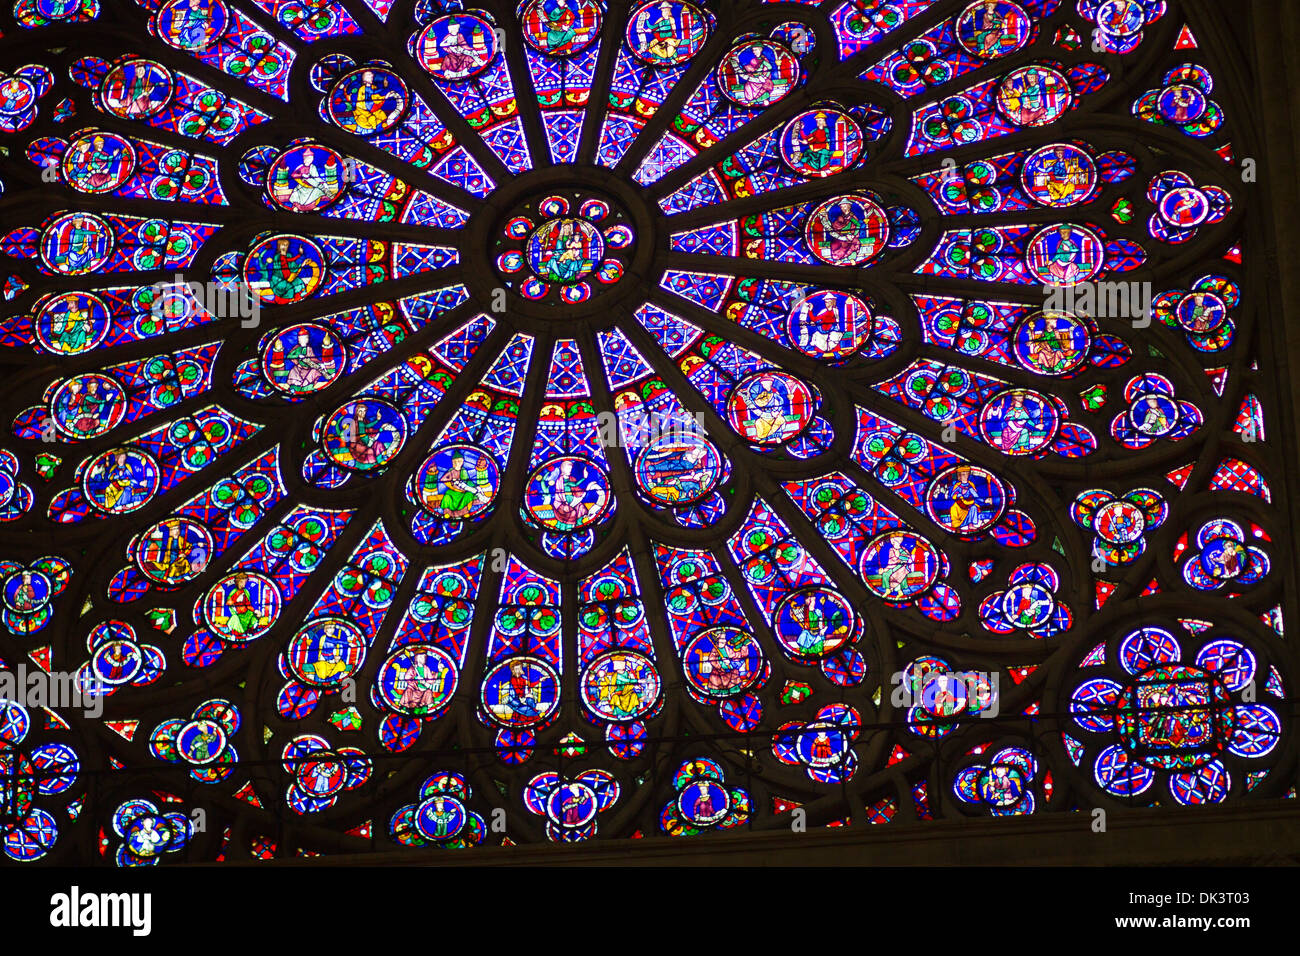 Rose Window of Notre Dame - The South Rose Window of Notre Dame offers a  Wonderful Background Stock Photo - Alamy